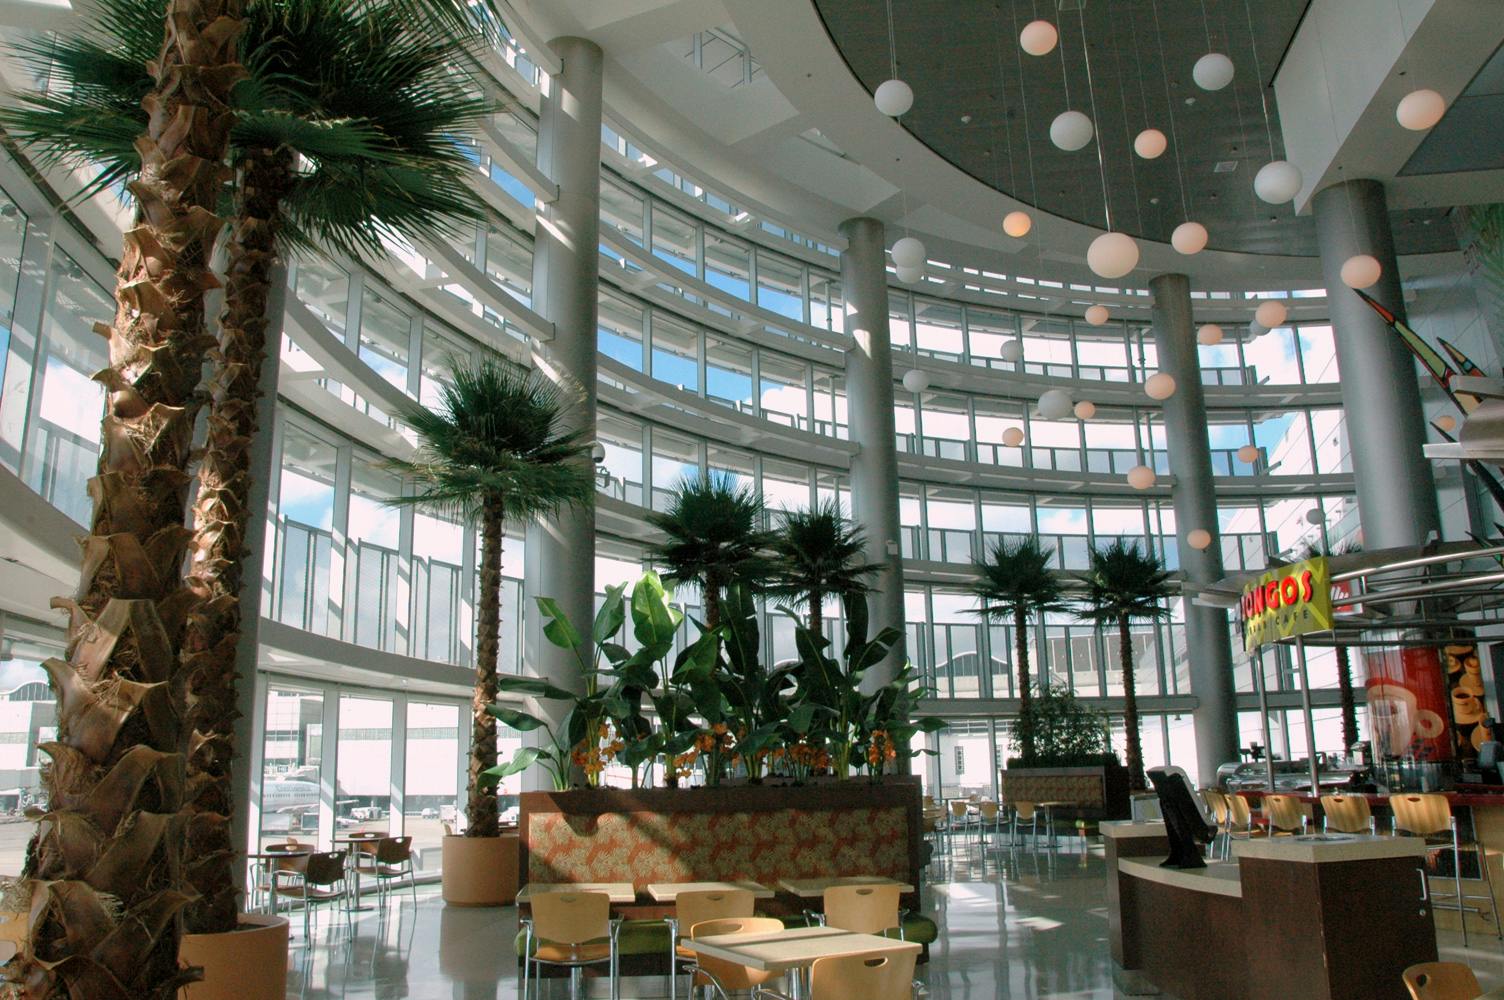 Miami International Airport South Terminal Concessions